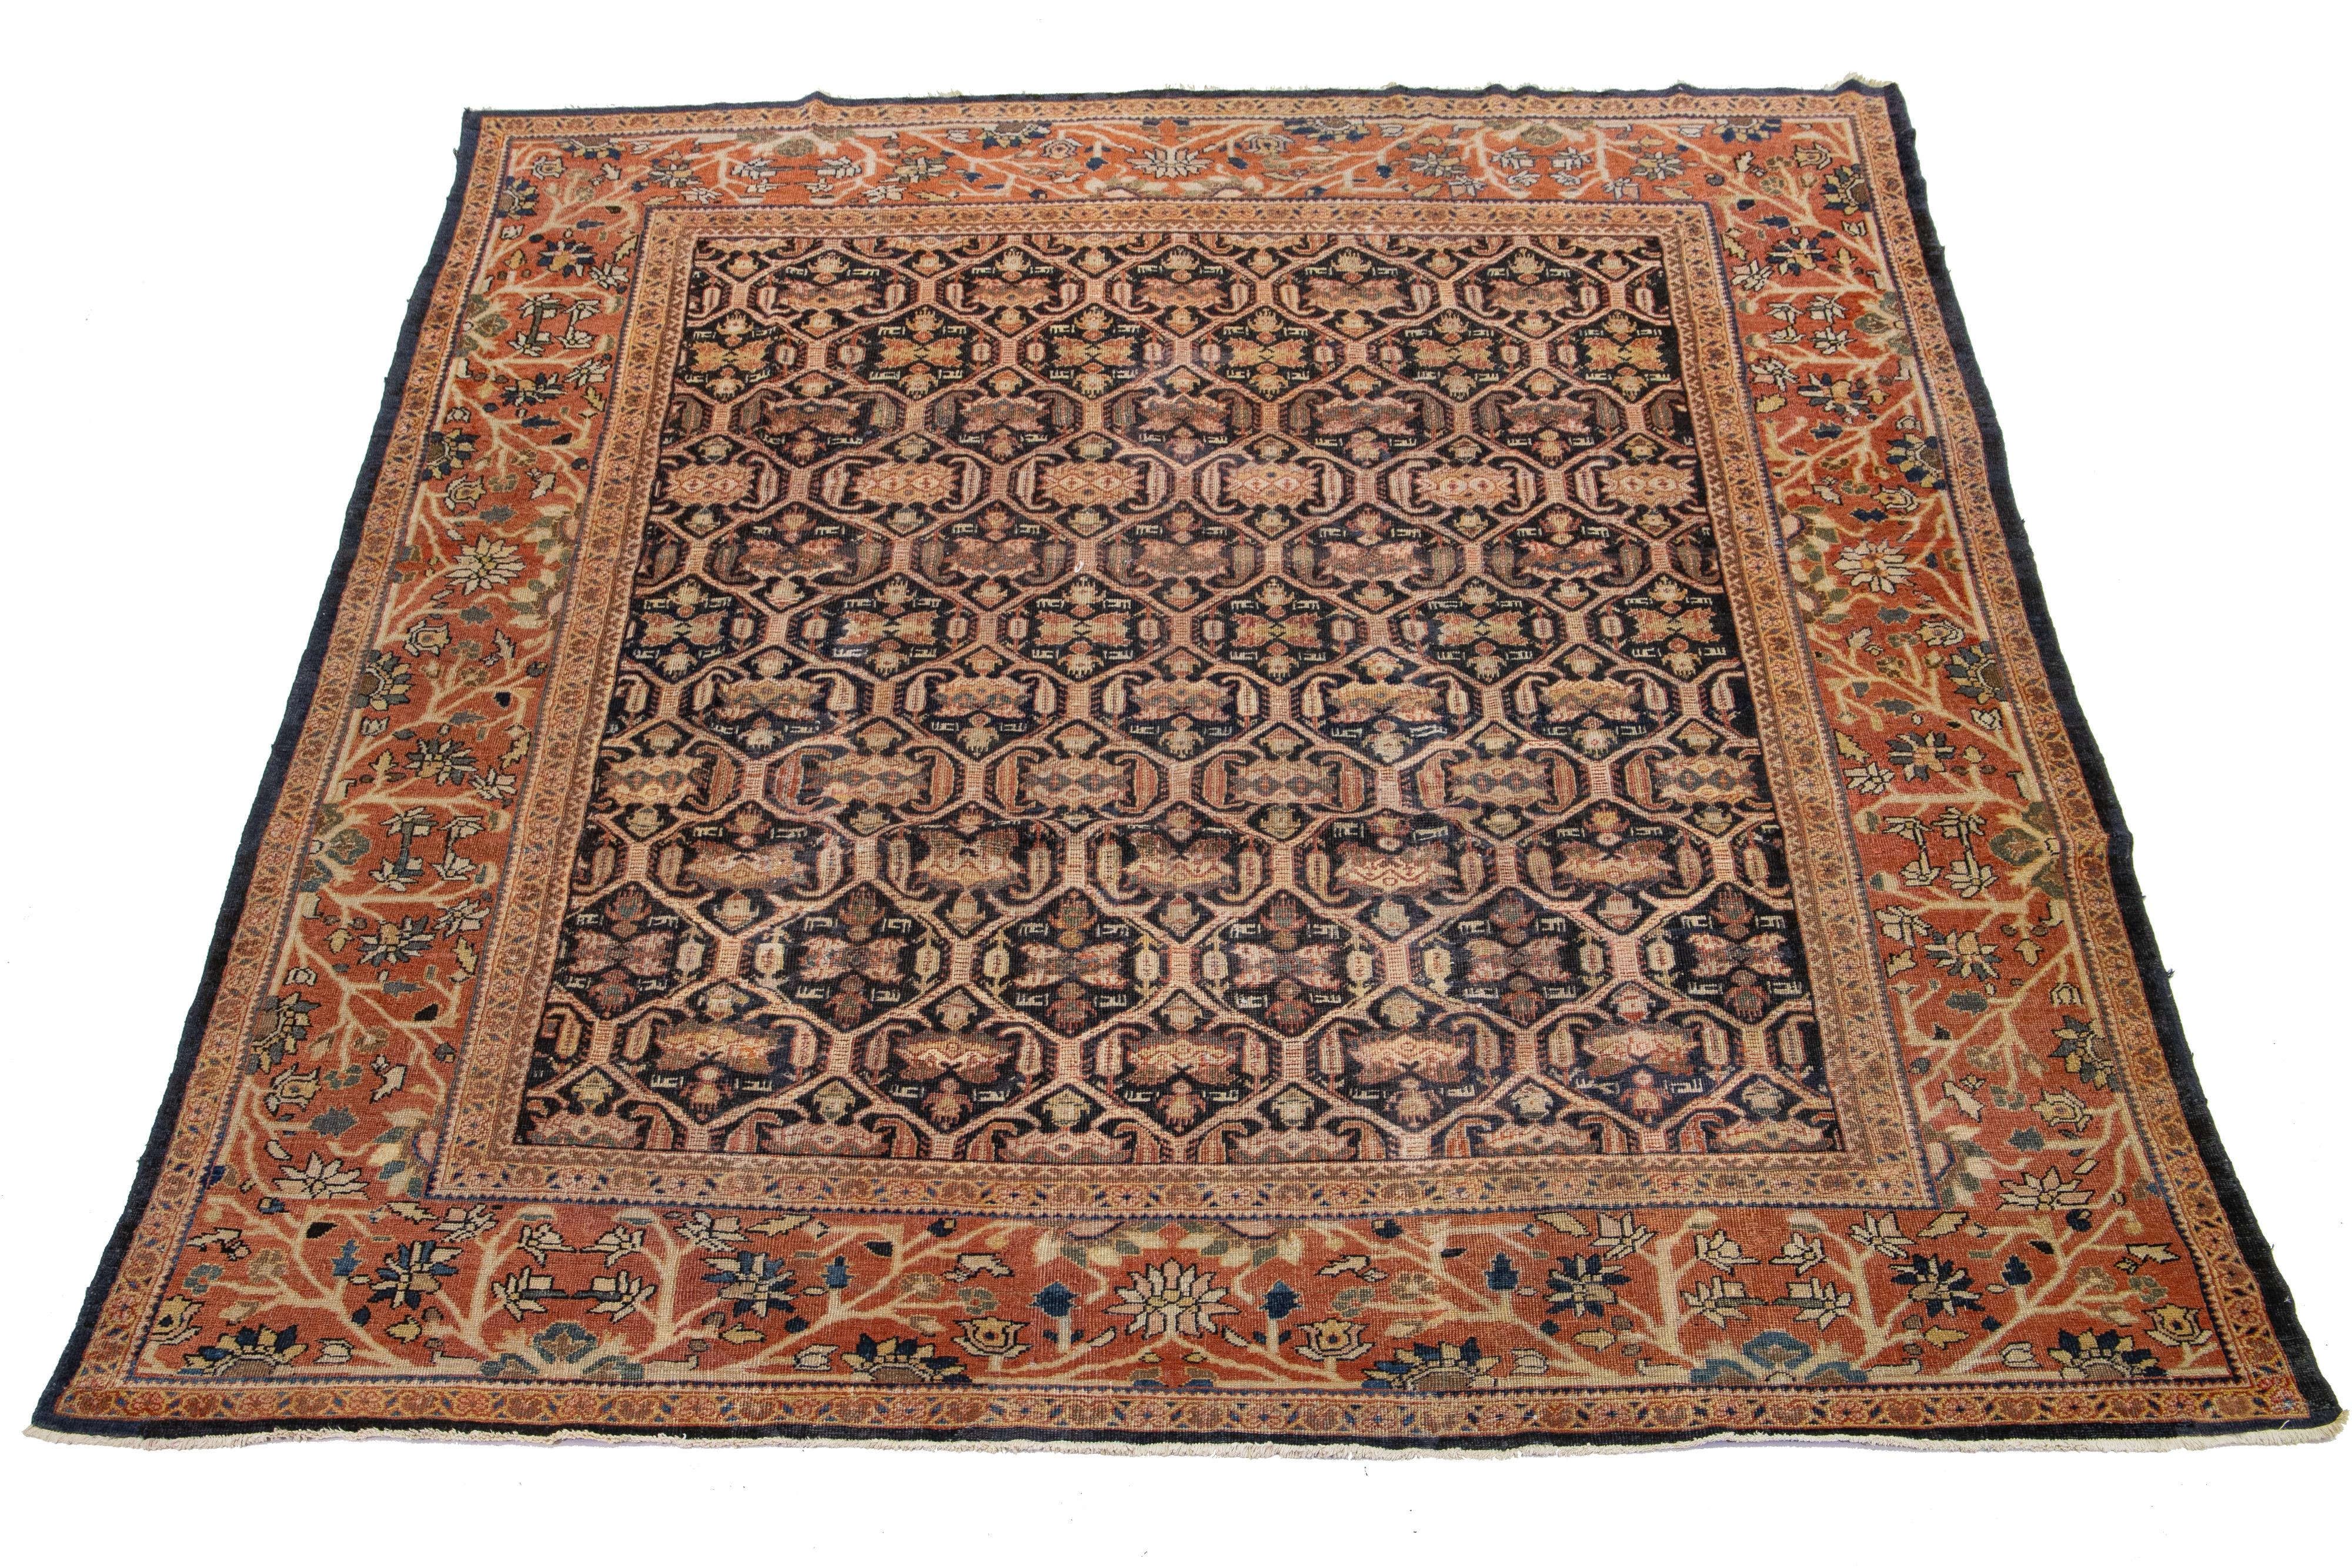 Beautiful antique Mahal hand-knotted wool rug with a dark blue field. This Persian rug has a Classic blue, rust, and brown design.

This rug measures 10'1